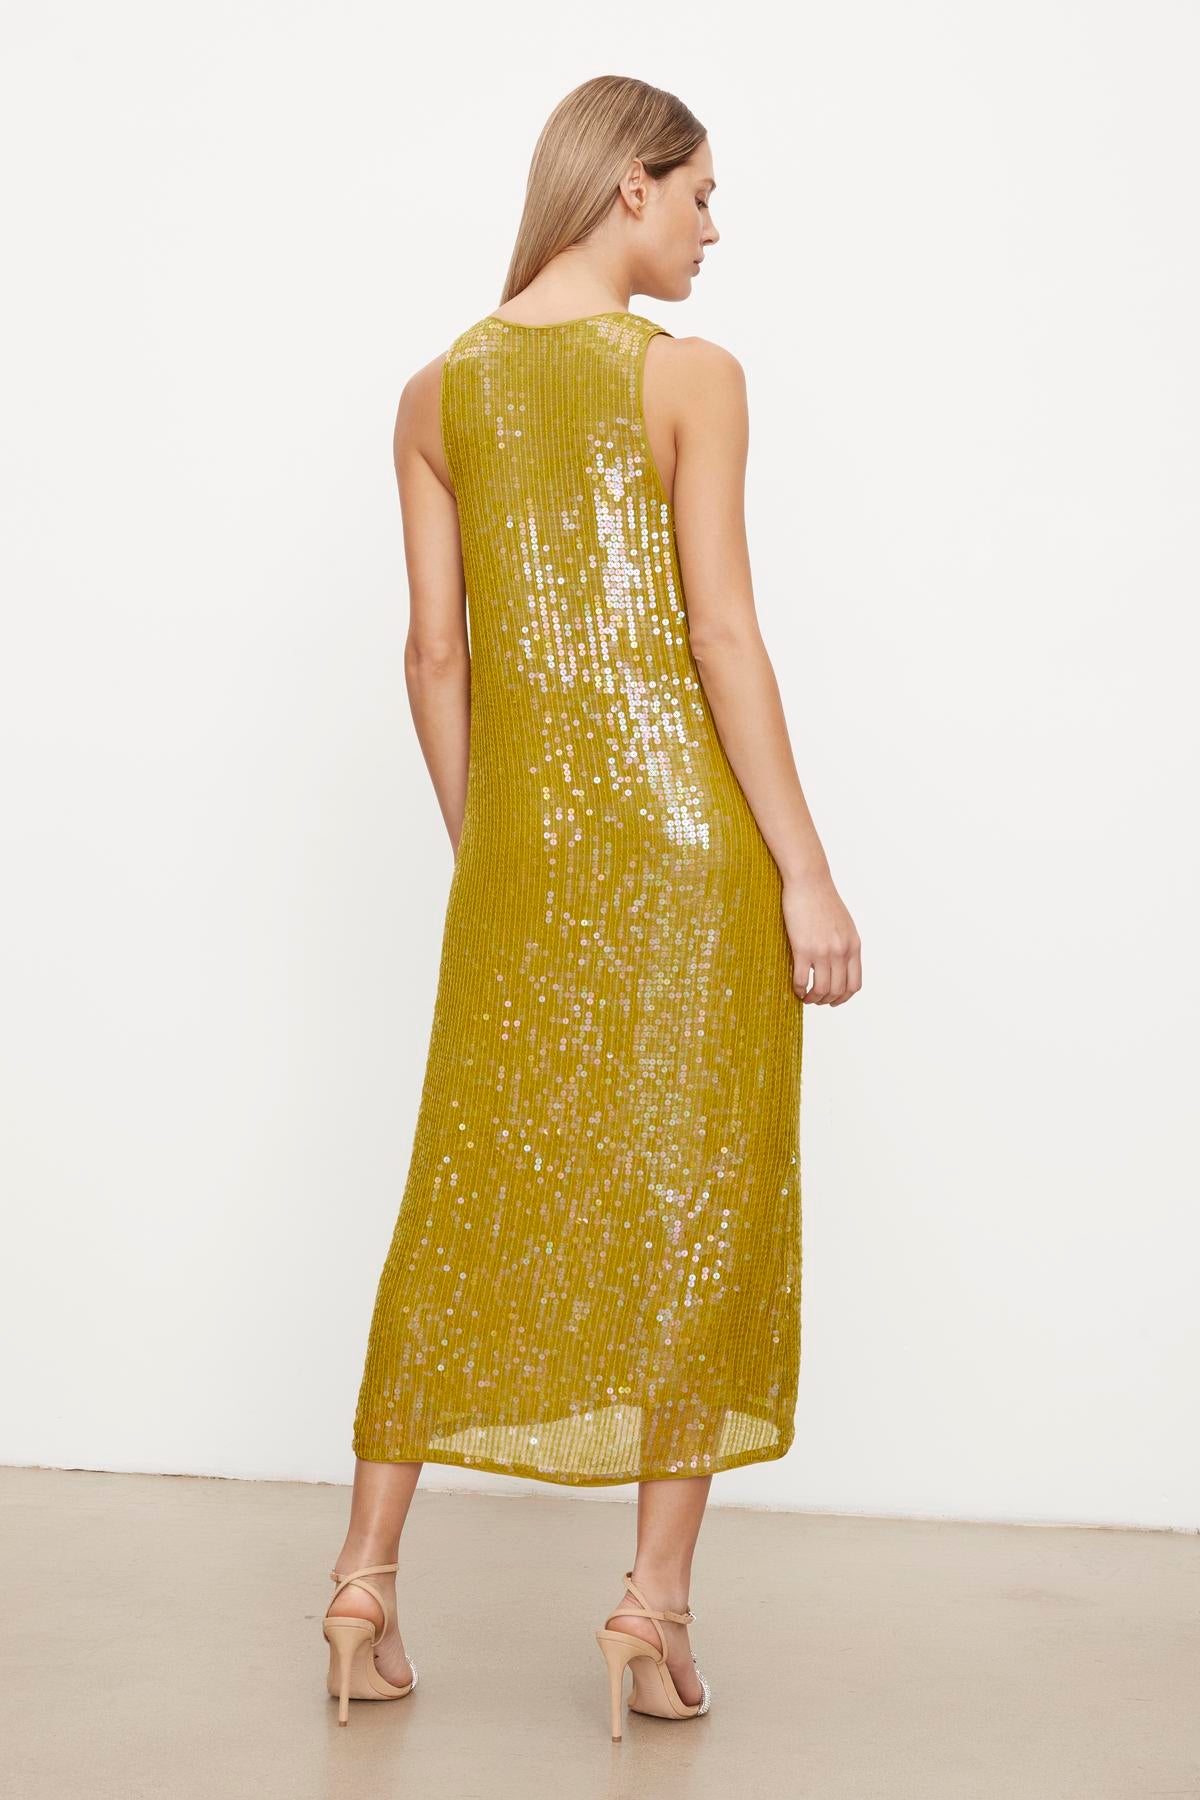 Woman modeling a sleeveless, mustard yellow Velvet by Graham & Spencer ALENA SEQUIN TANK DRESS with a high neckline, viewed from the back.-36220818129089